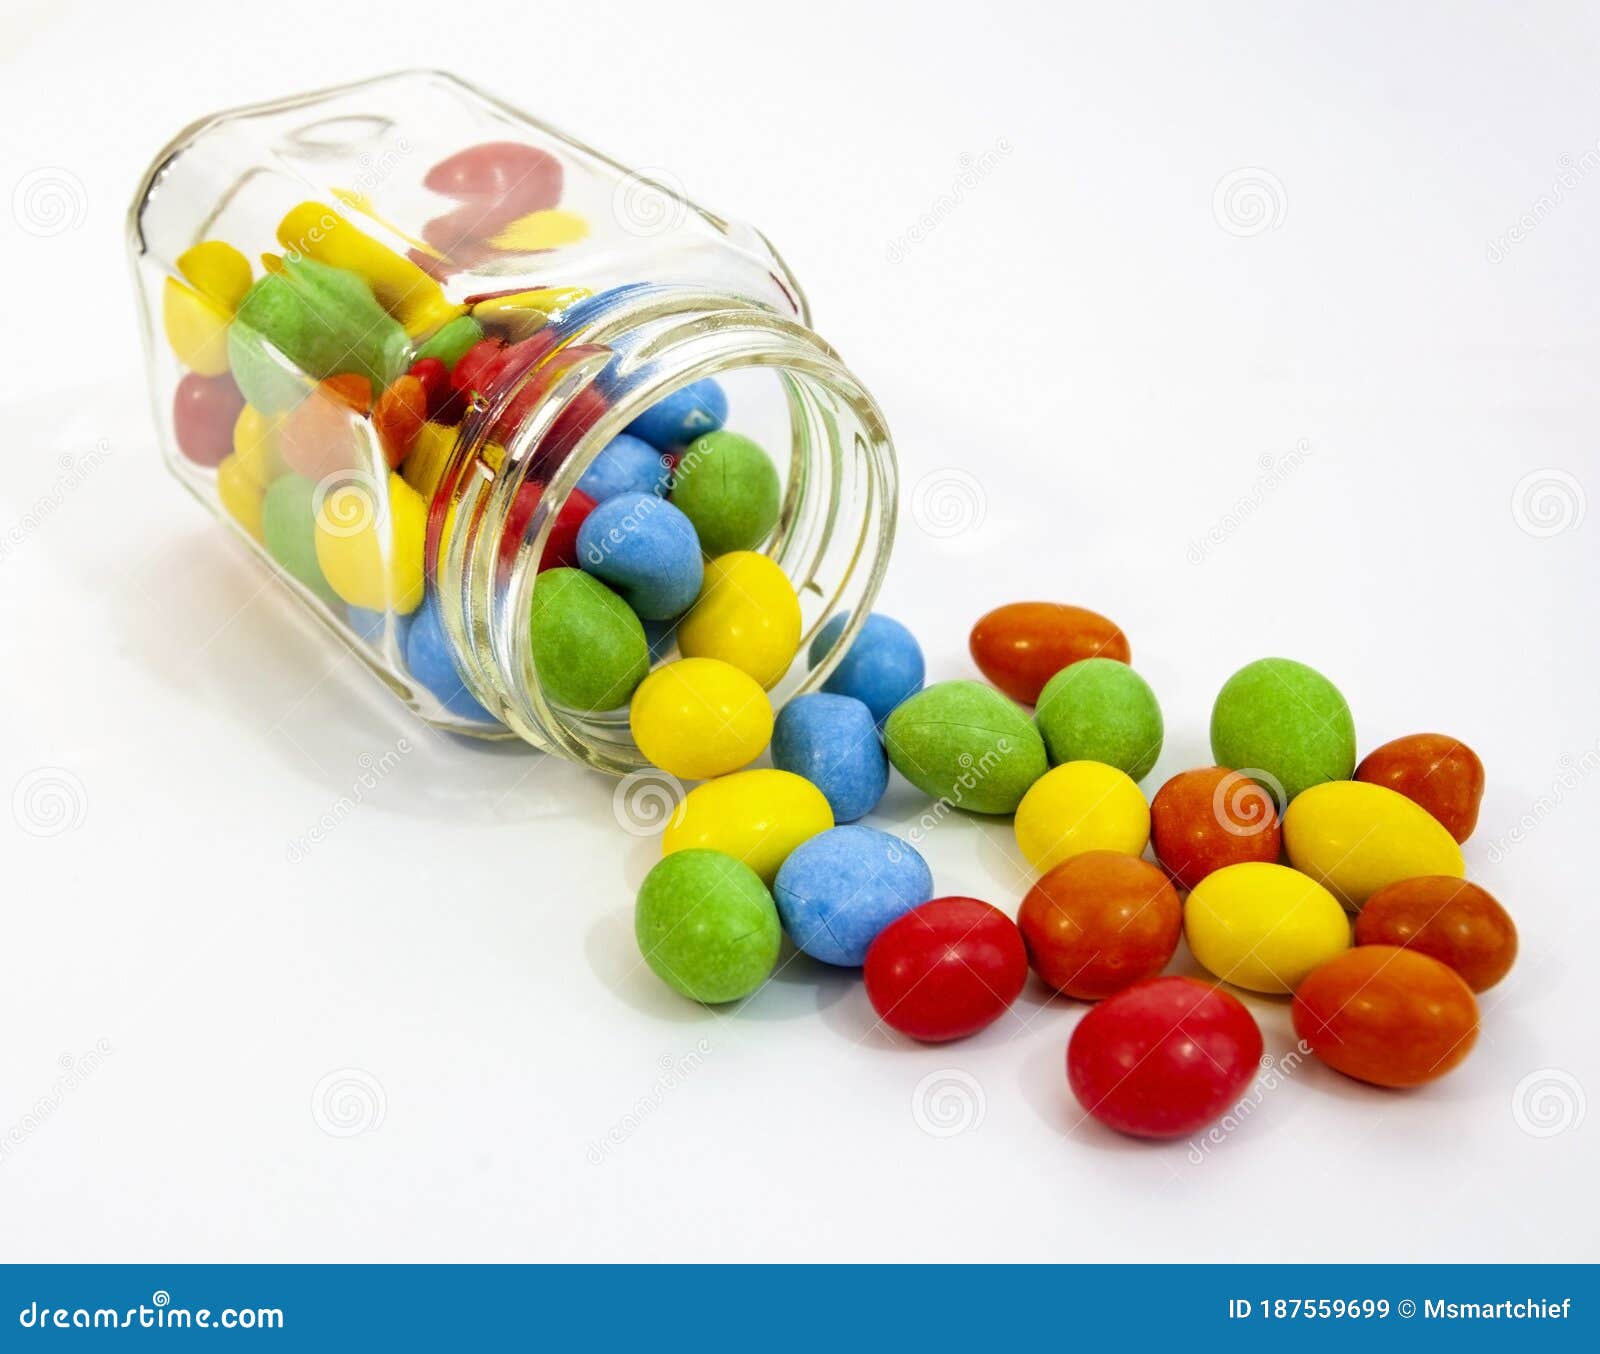 Colorful Group Of Chocolate Candies With Sugar Shells Spilling From A ...